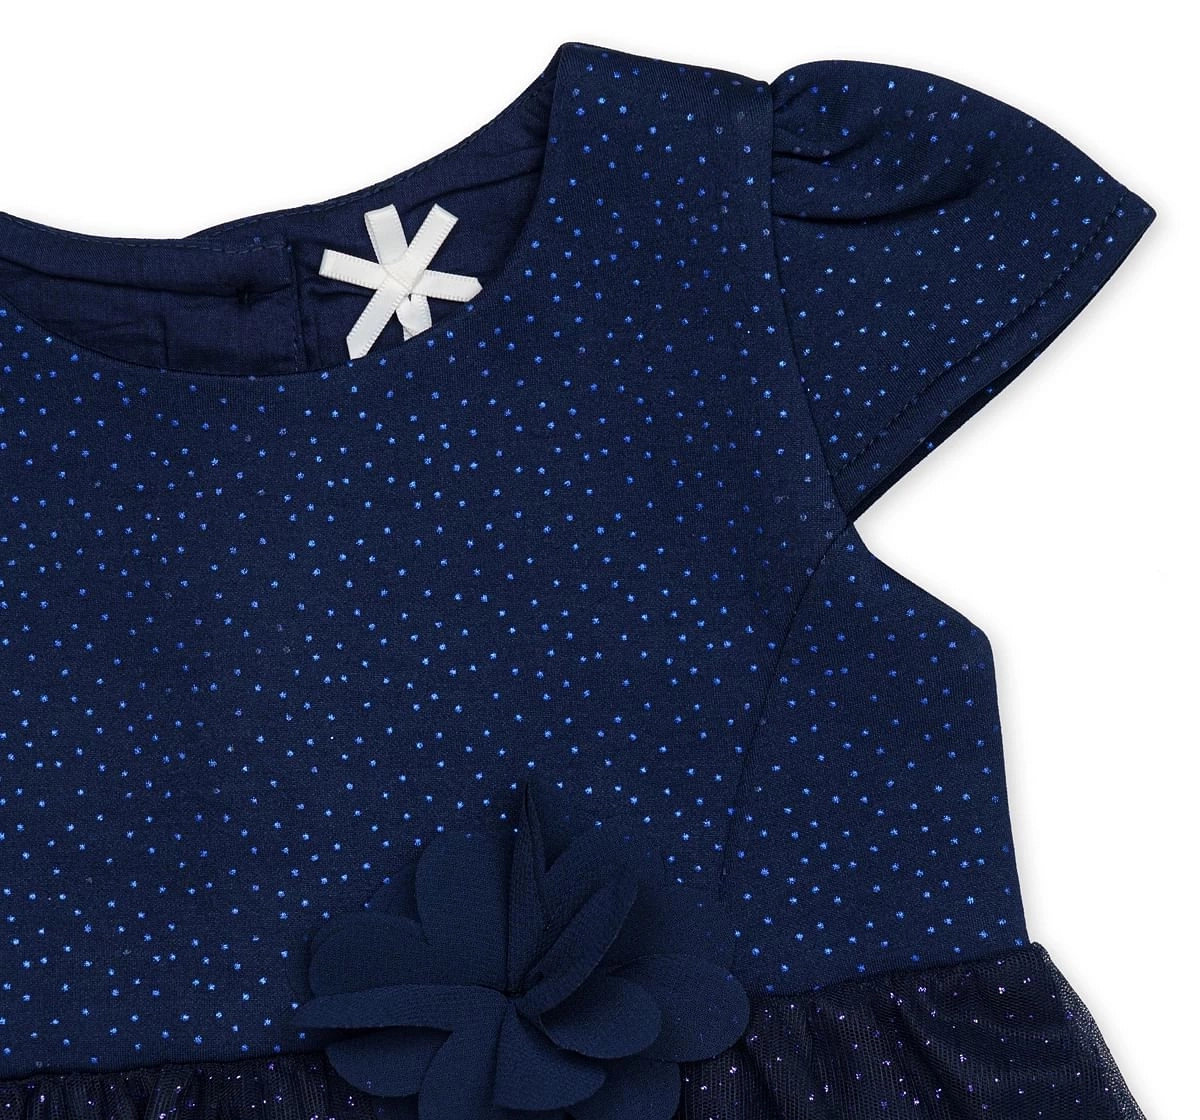 H by Hamleys Dresses, Pack of 1, Navy Blue, 24M+, Polyester